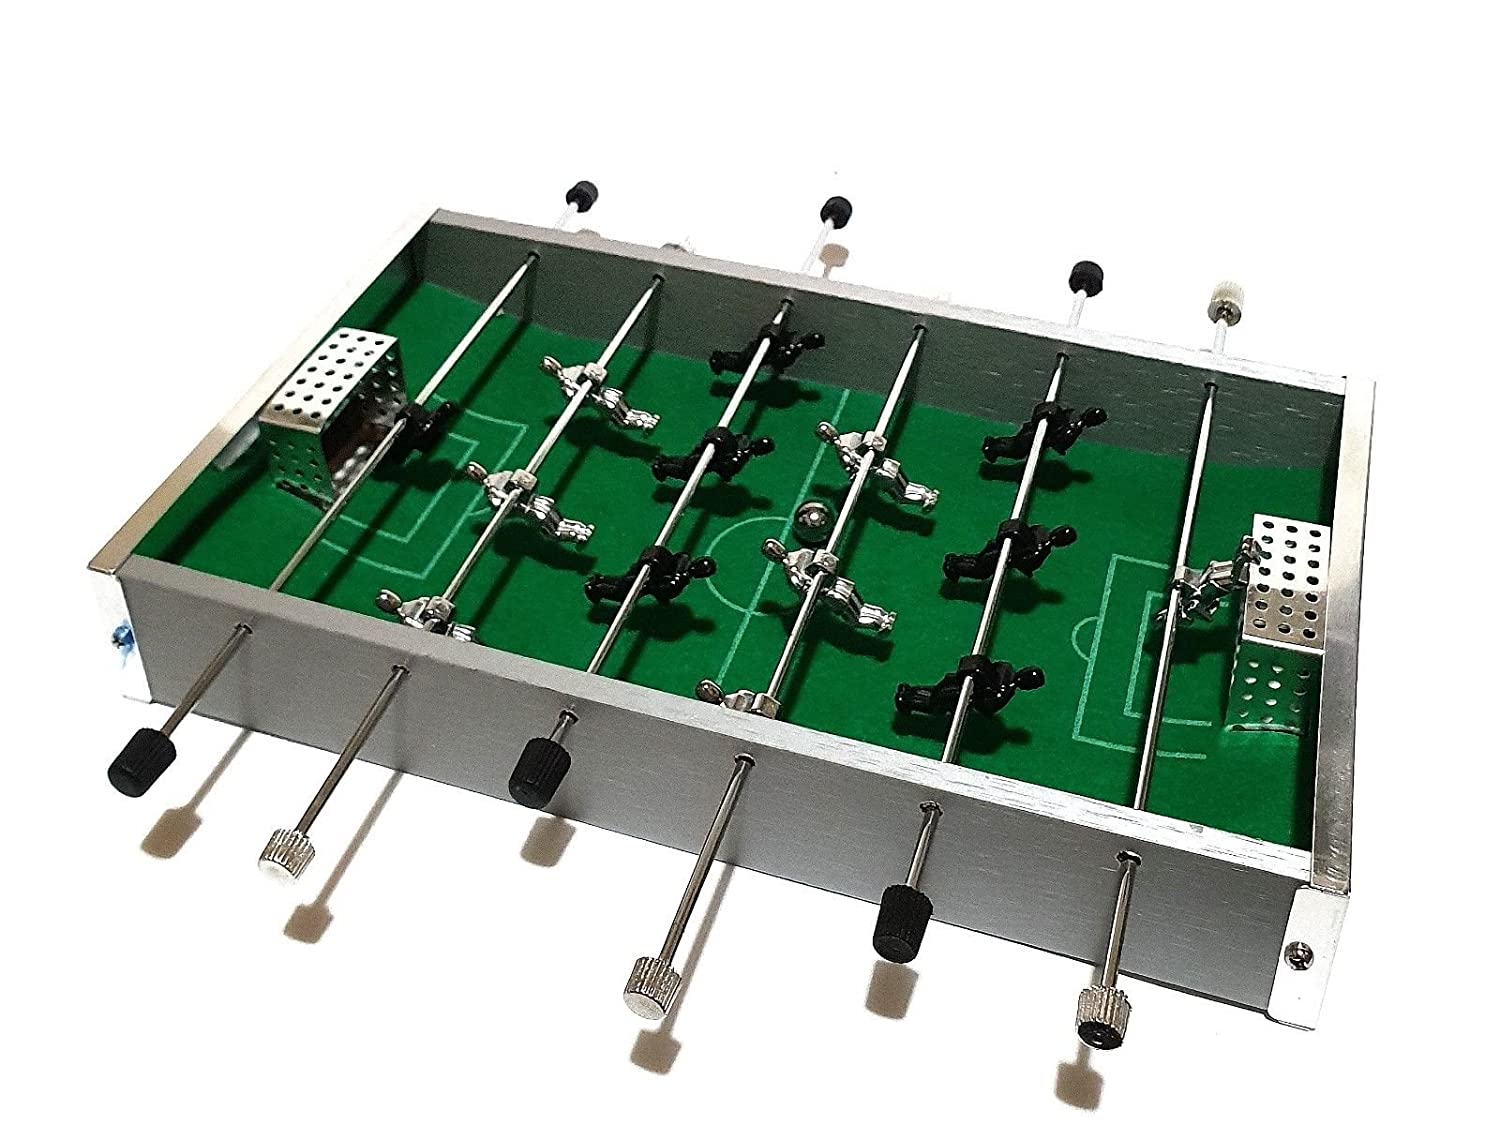 What are the best professional foosball table manufacturers?